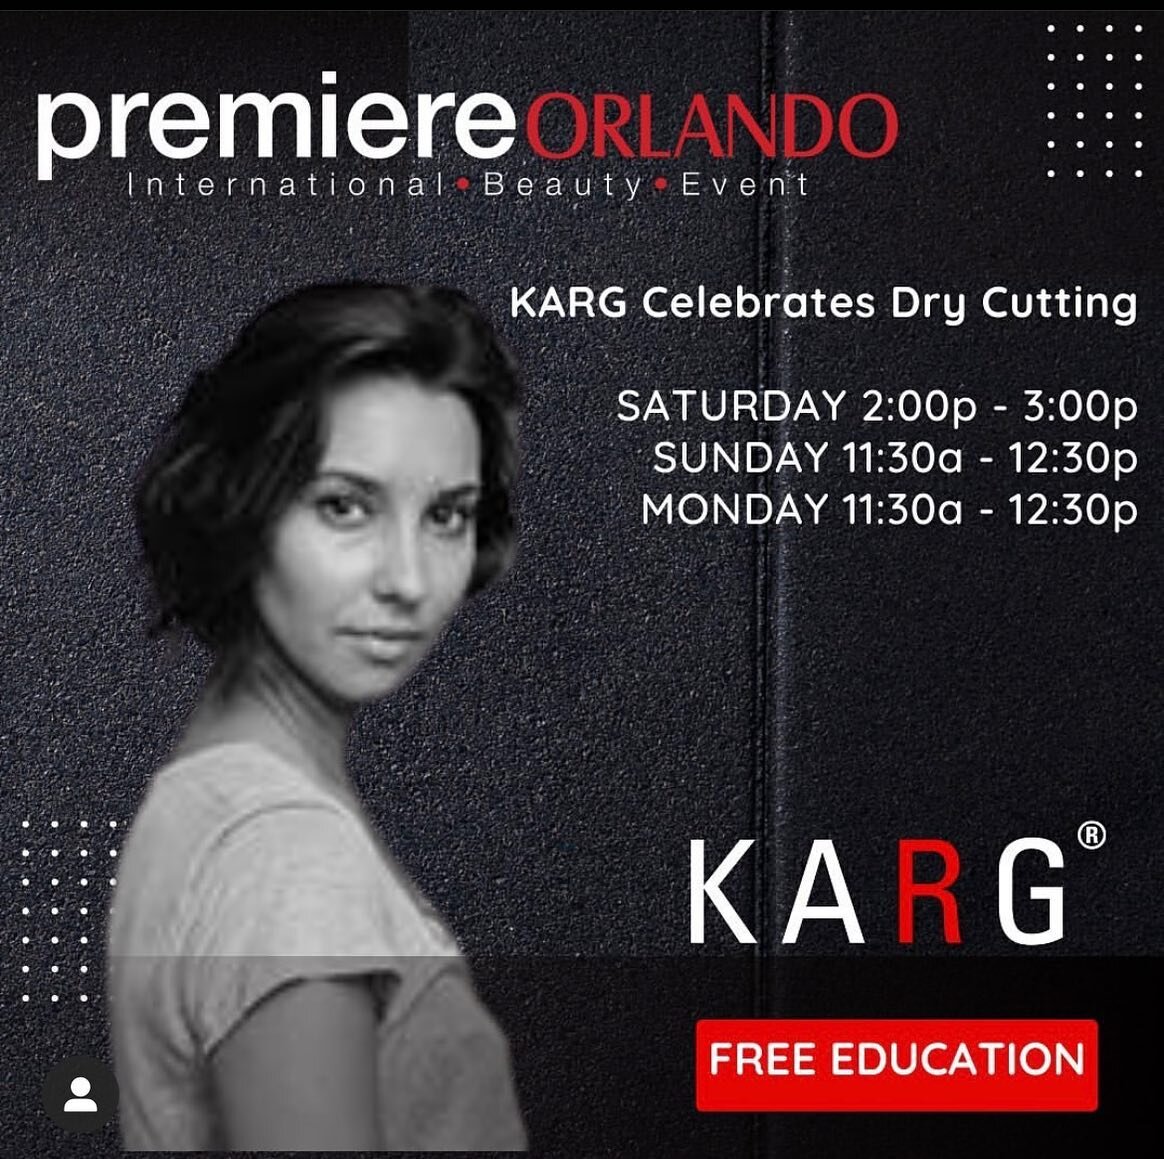 So excited to be at @premiere_orlando reunion with #dryhaircutting gods it&rsquo;s been 2 years too long @mikekargofficial @russdoeshair @ericawrightnyc looking forward to seeing everyone! #premiereorlando2022 🌟🌟💫

#Italianbob #Bixie #Bluntchopped